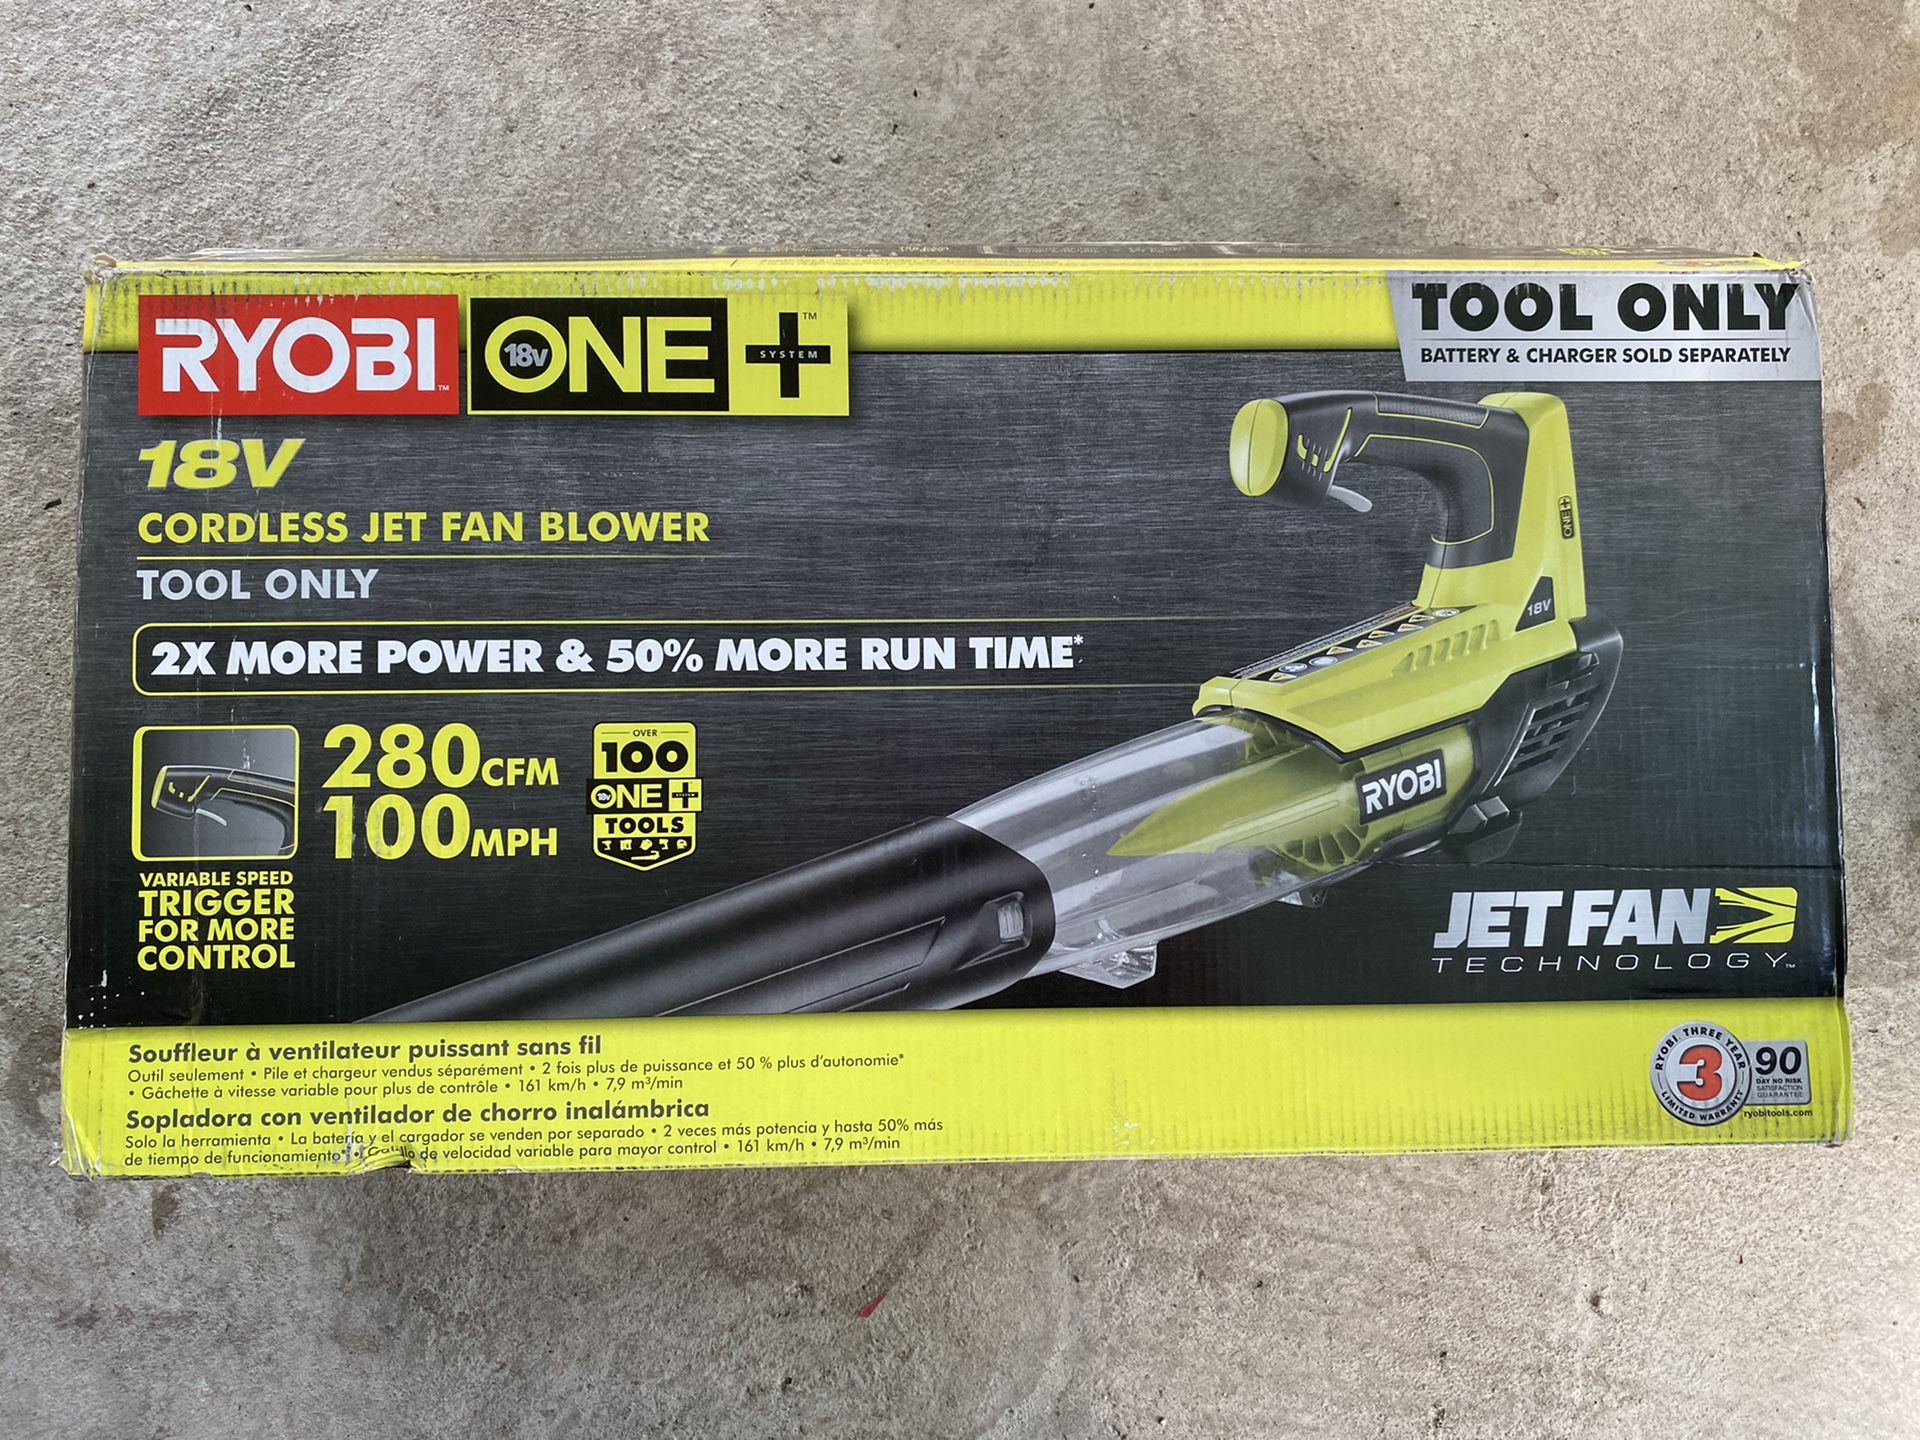 Ryobi one+ leaf blower tool only open box - battery operated battery not included